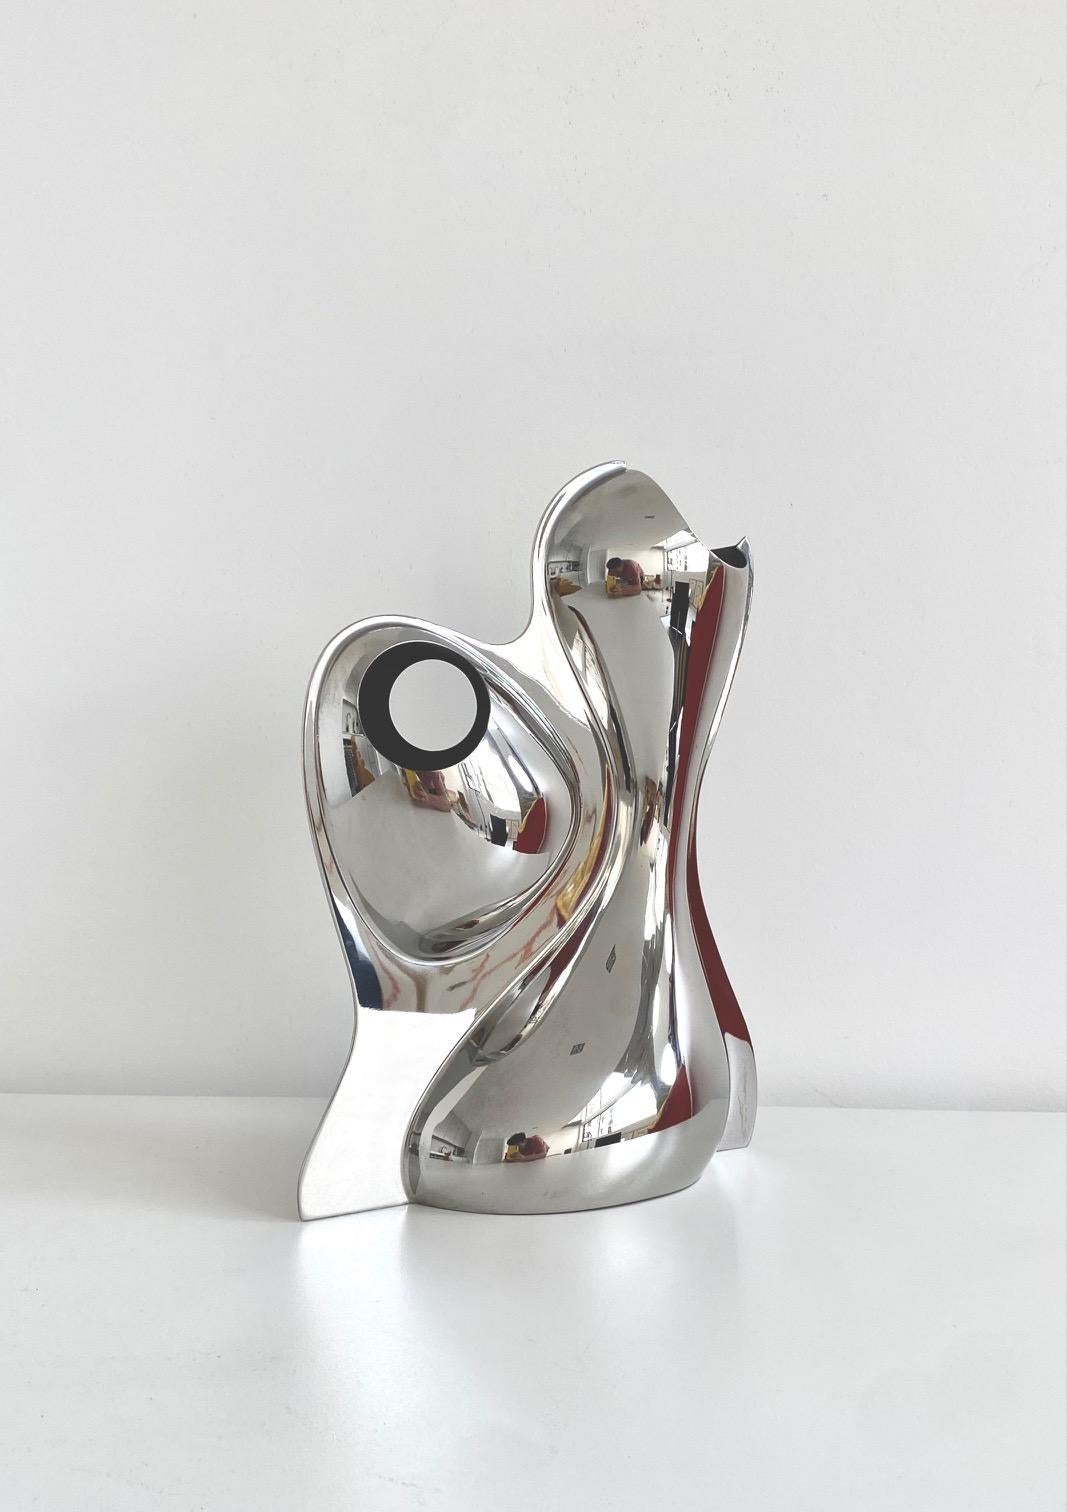 
Babyboop RA06 sculpture vase by Ron Arad - Alessi, 2002

This vase is out of production

